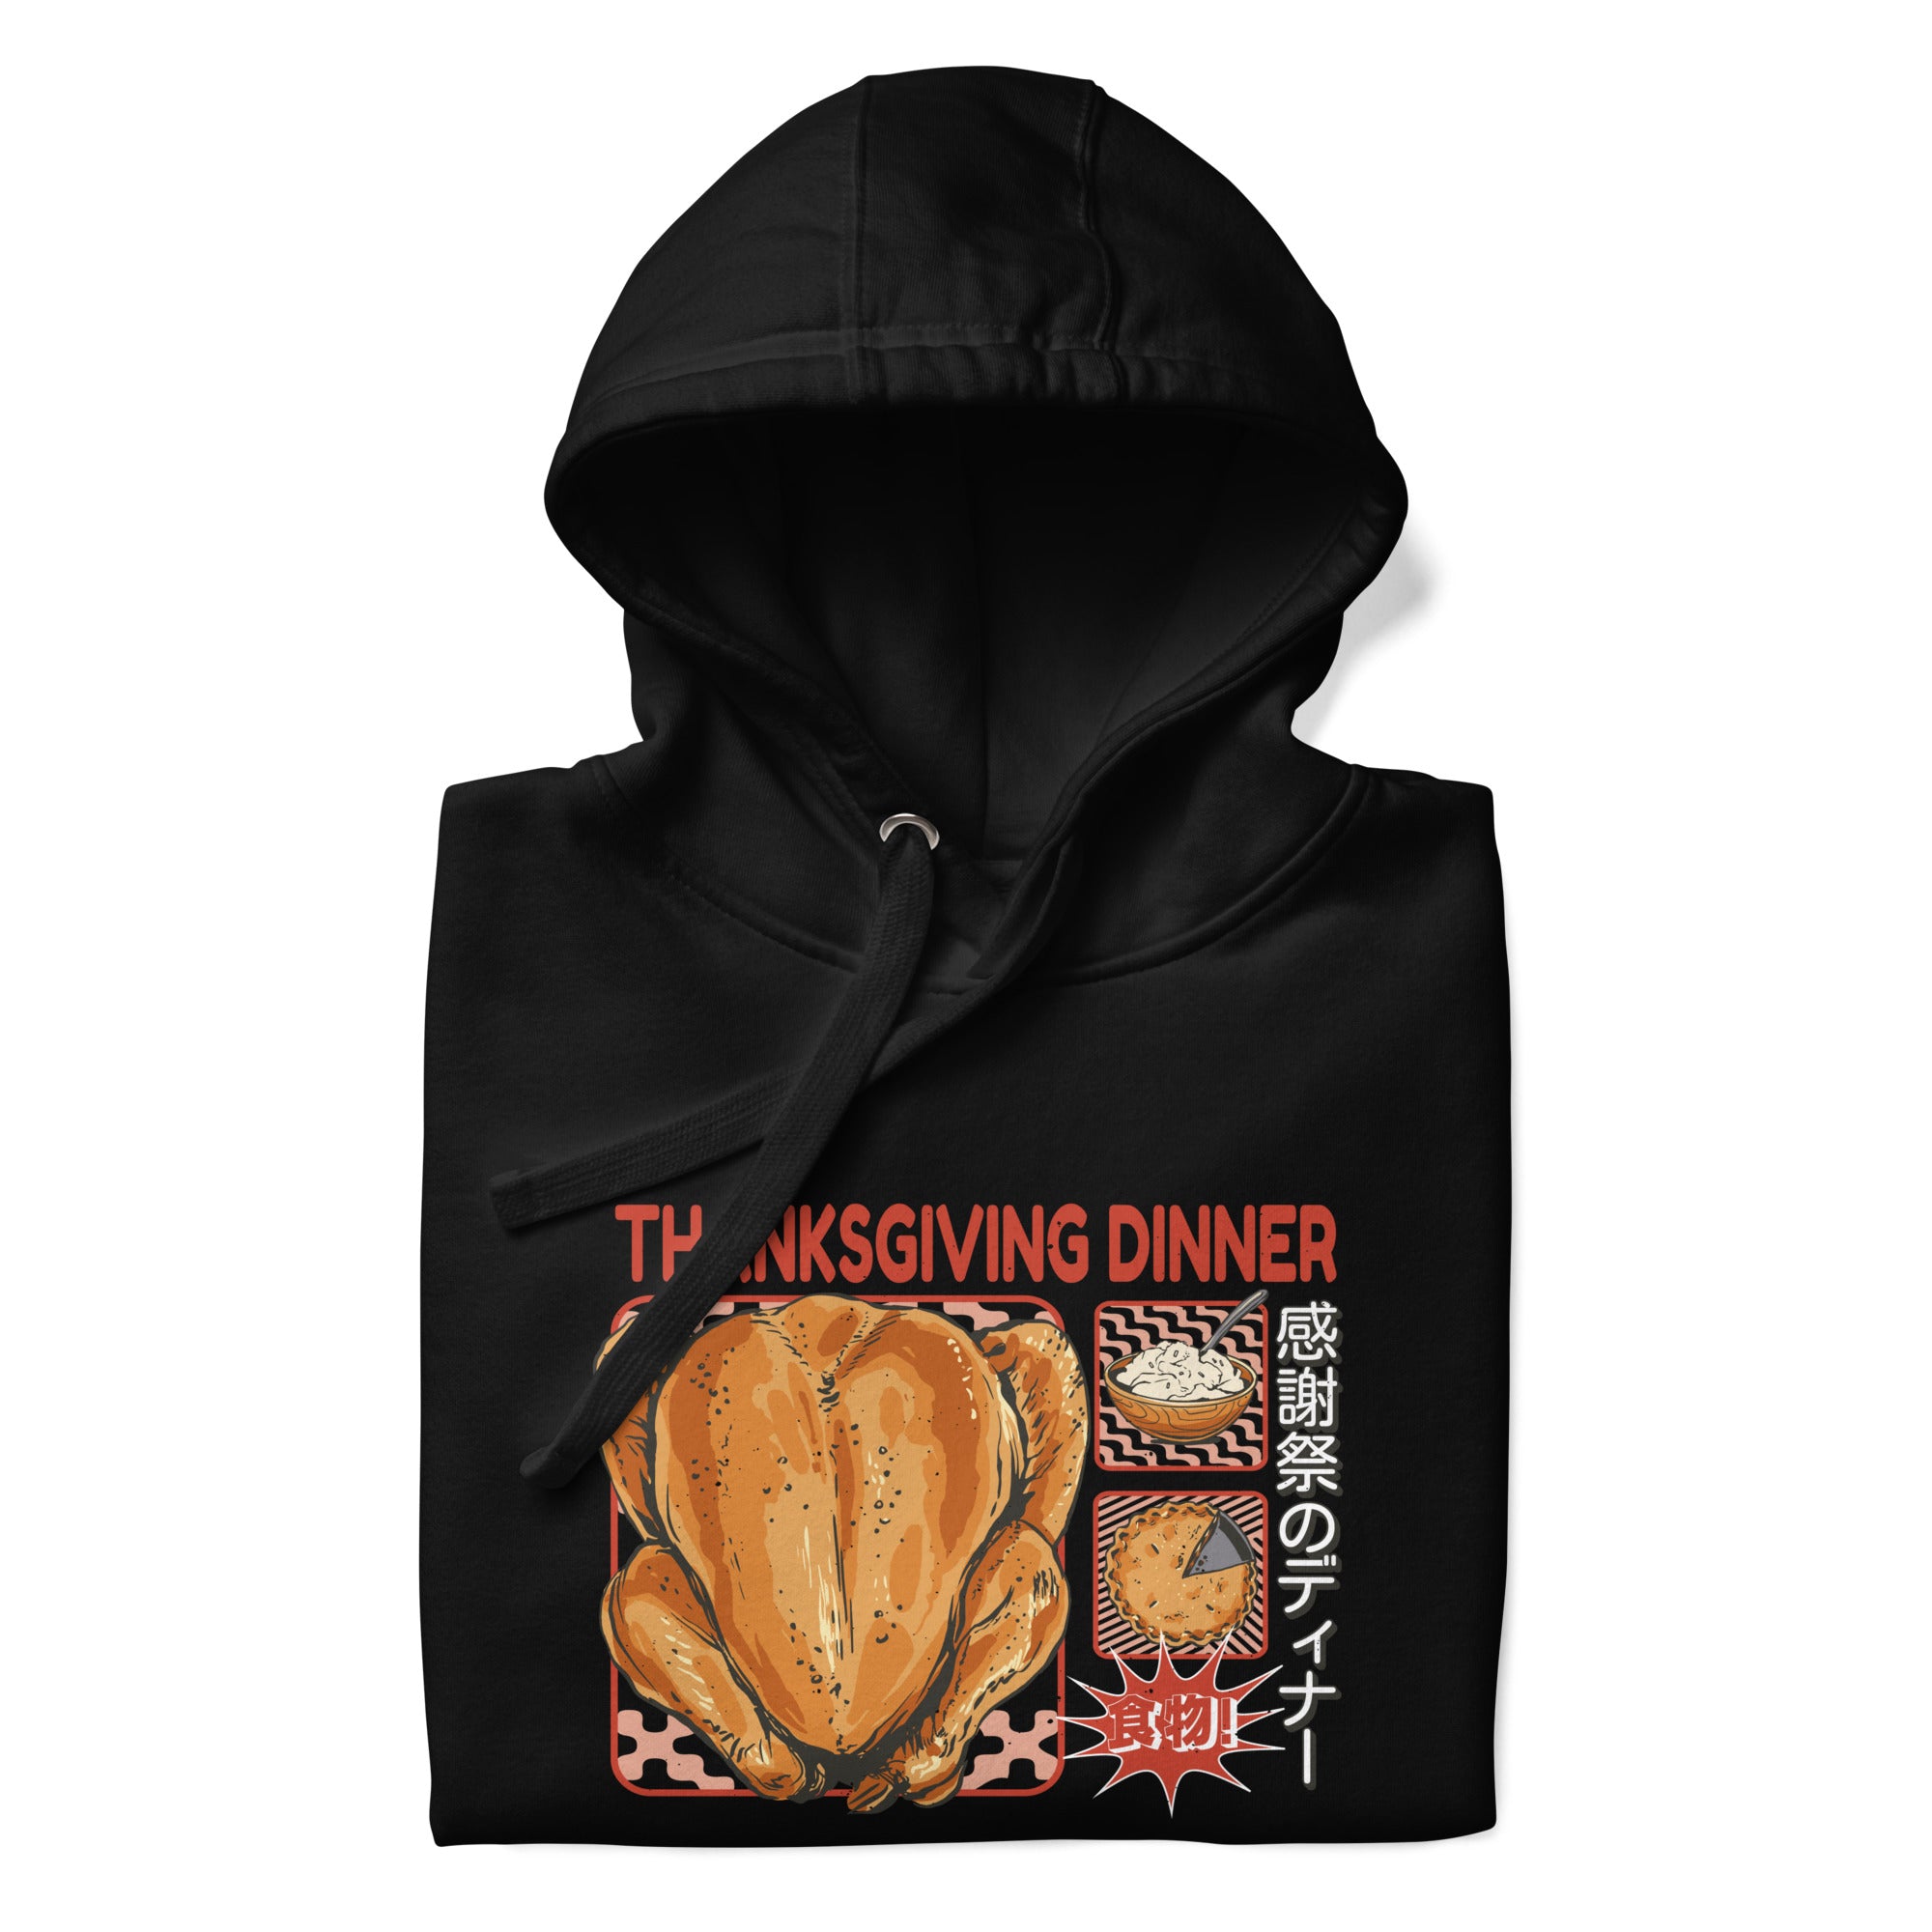 Folded Japanese Thanksgiving Hoodie in Black color: A classic black hoodie featuring a graphic print of a Japanese Thanksgiving, including a roast chicken, Japanese potato salad, and an apple pie. The hoodie is neatly folded.